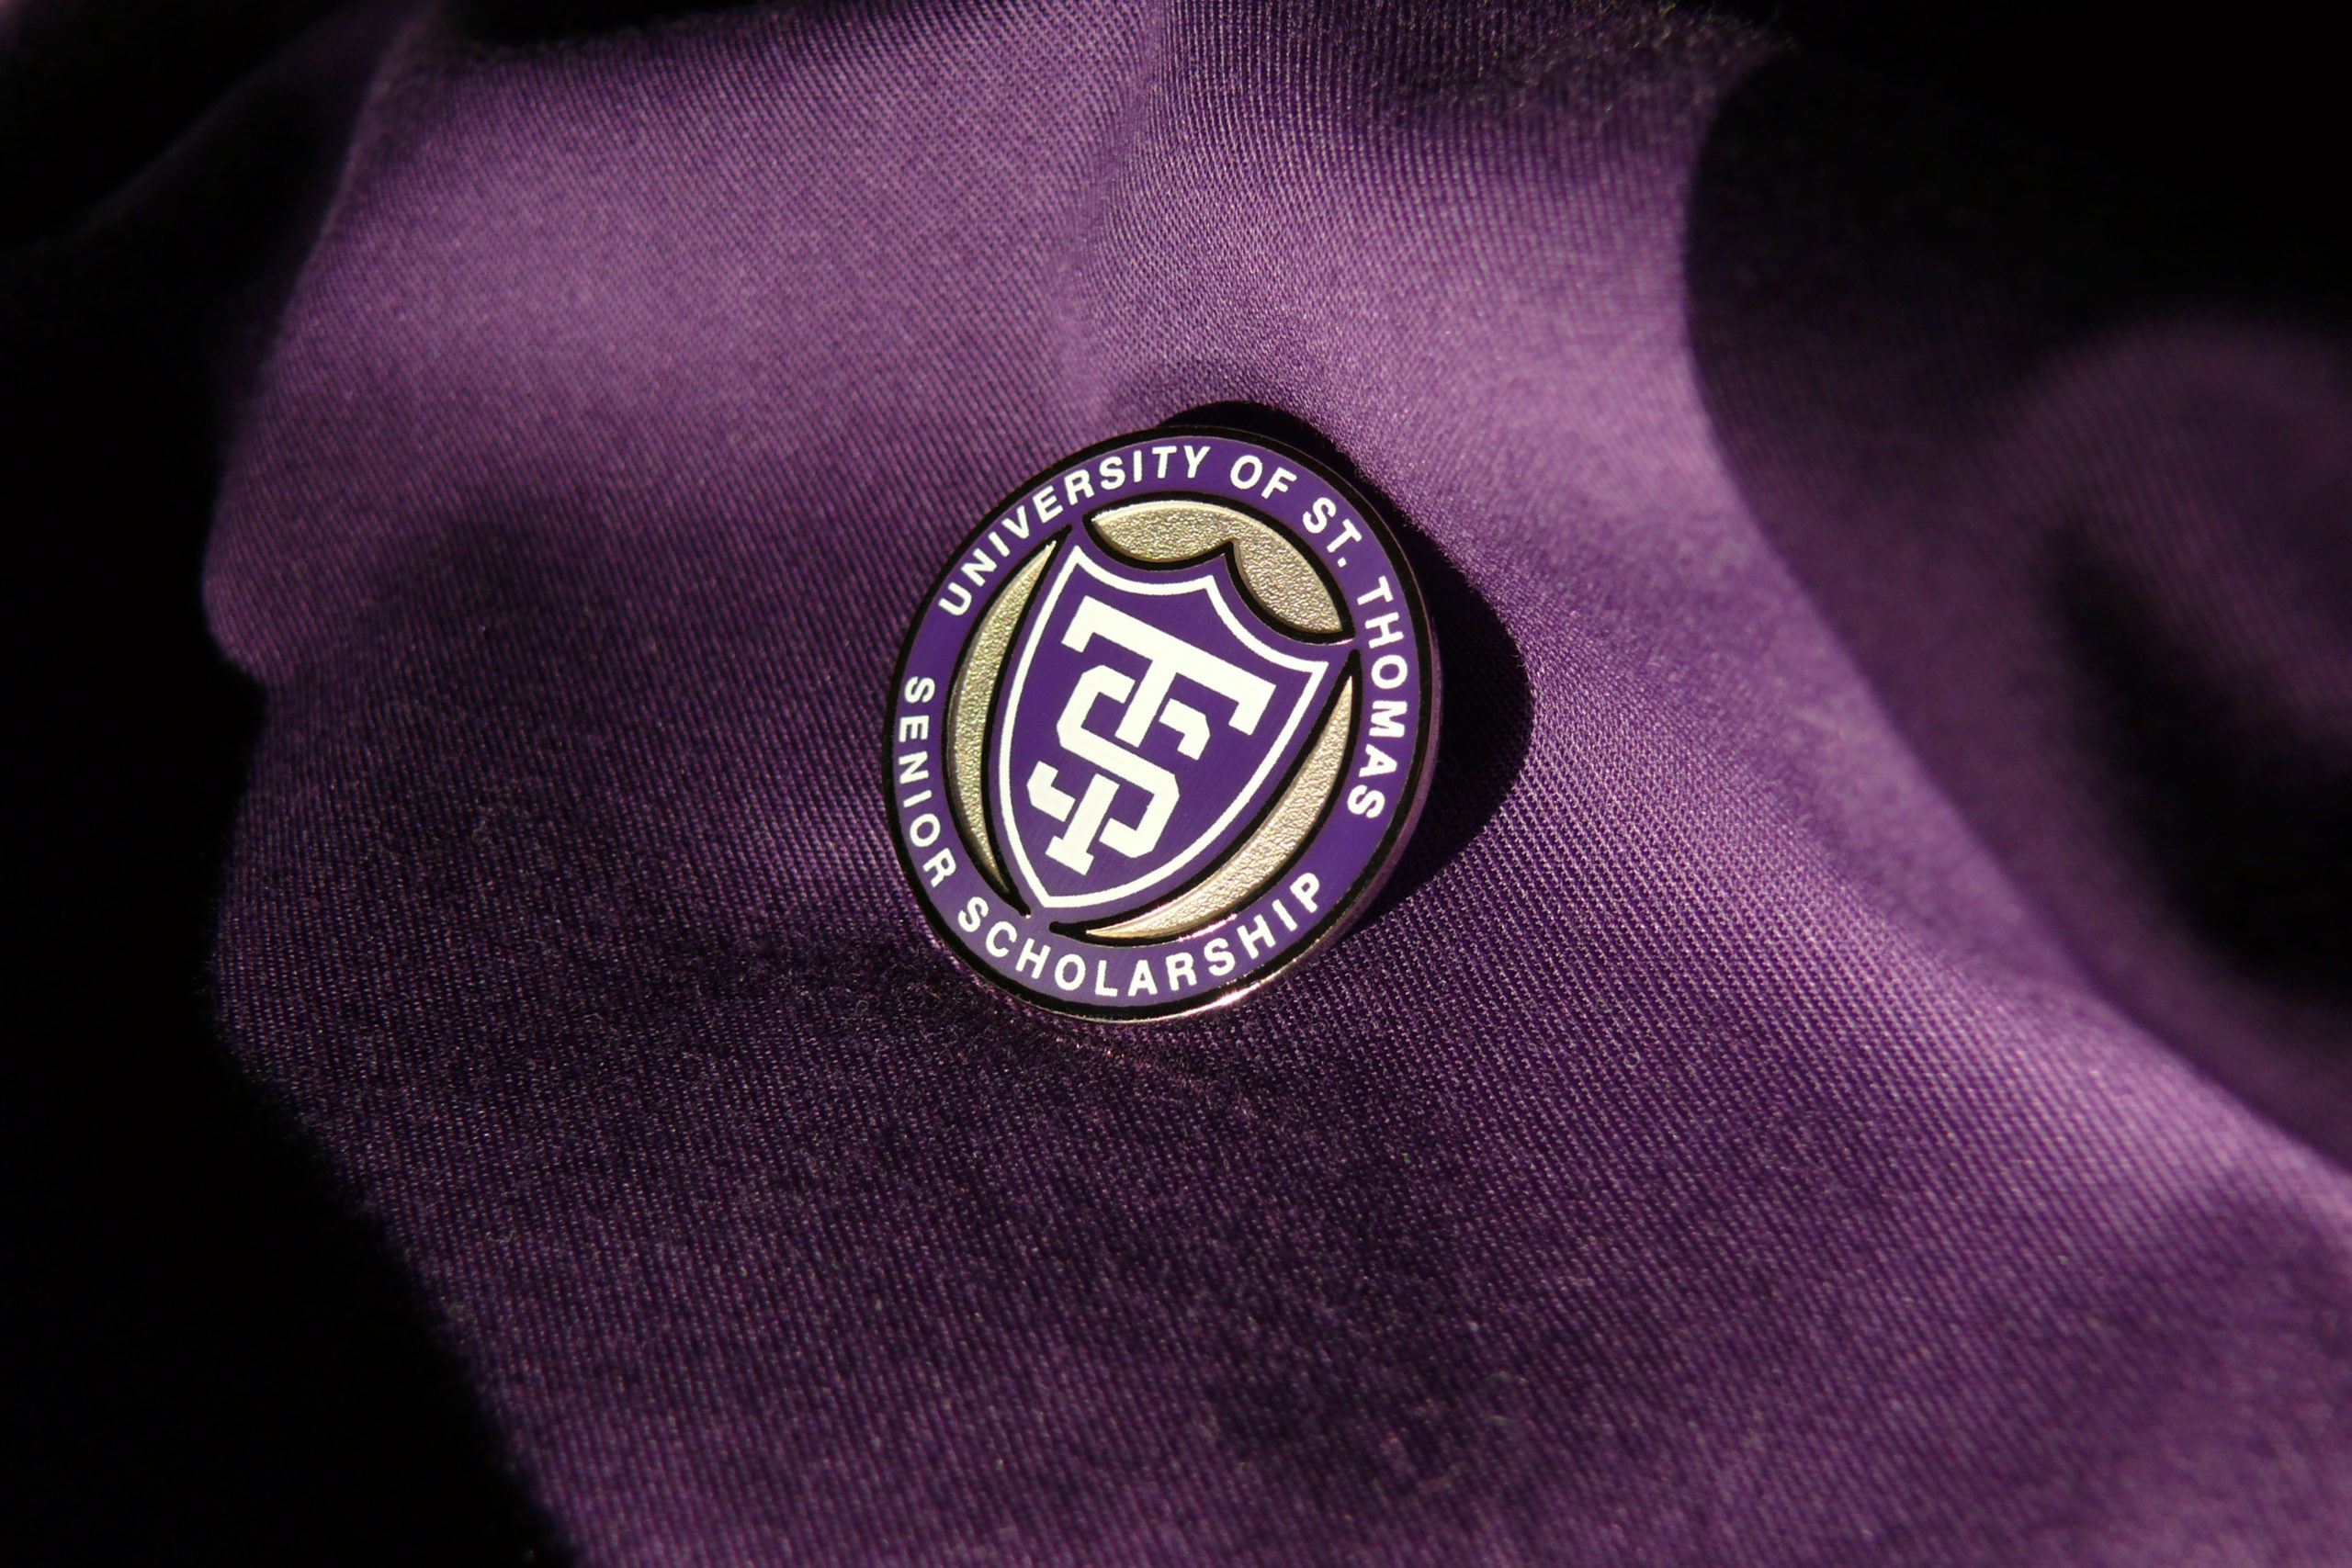 Students who give to the Senior Class Gift will be recognized with a special lapel pin.